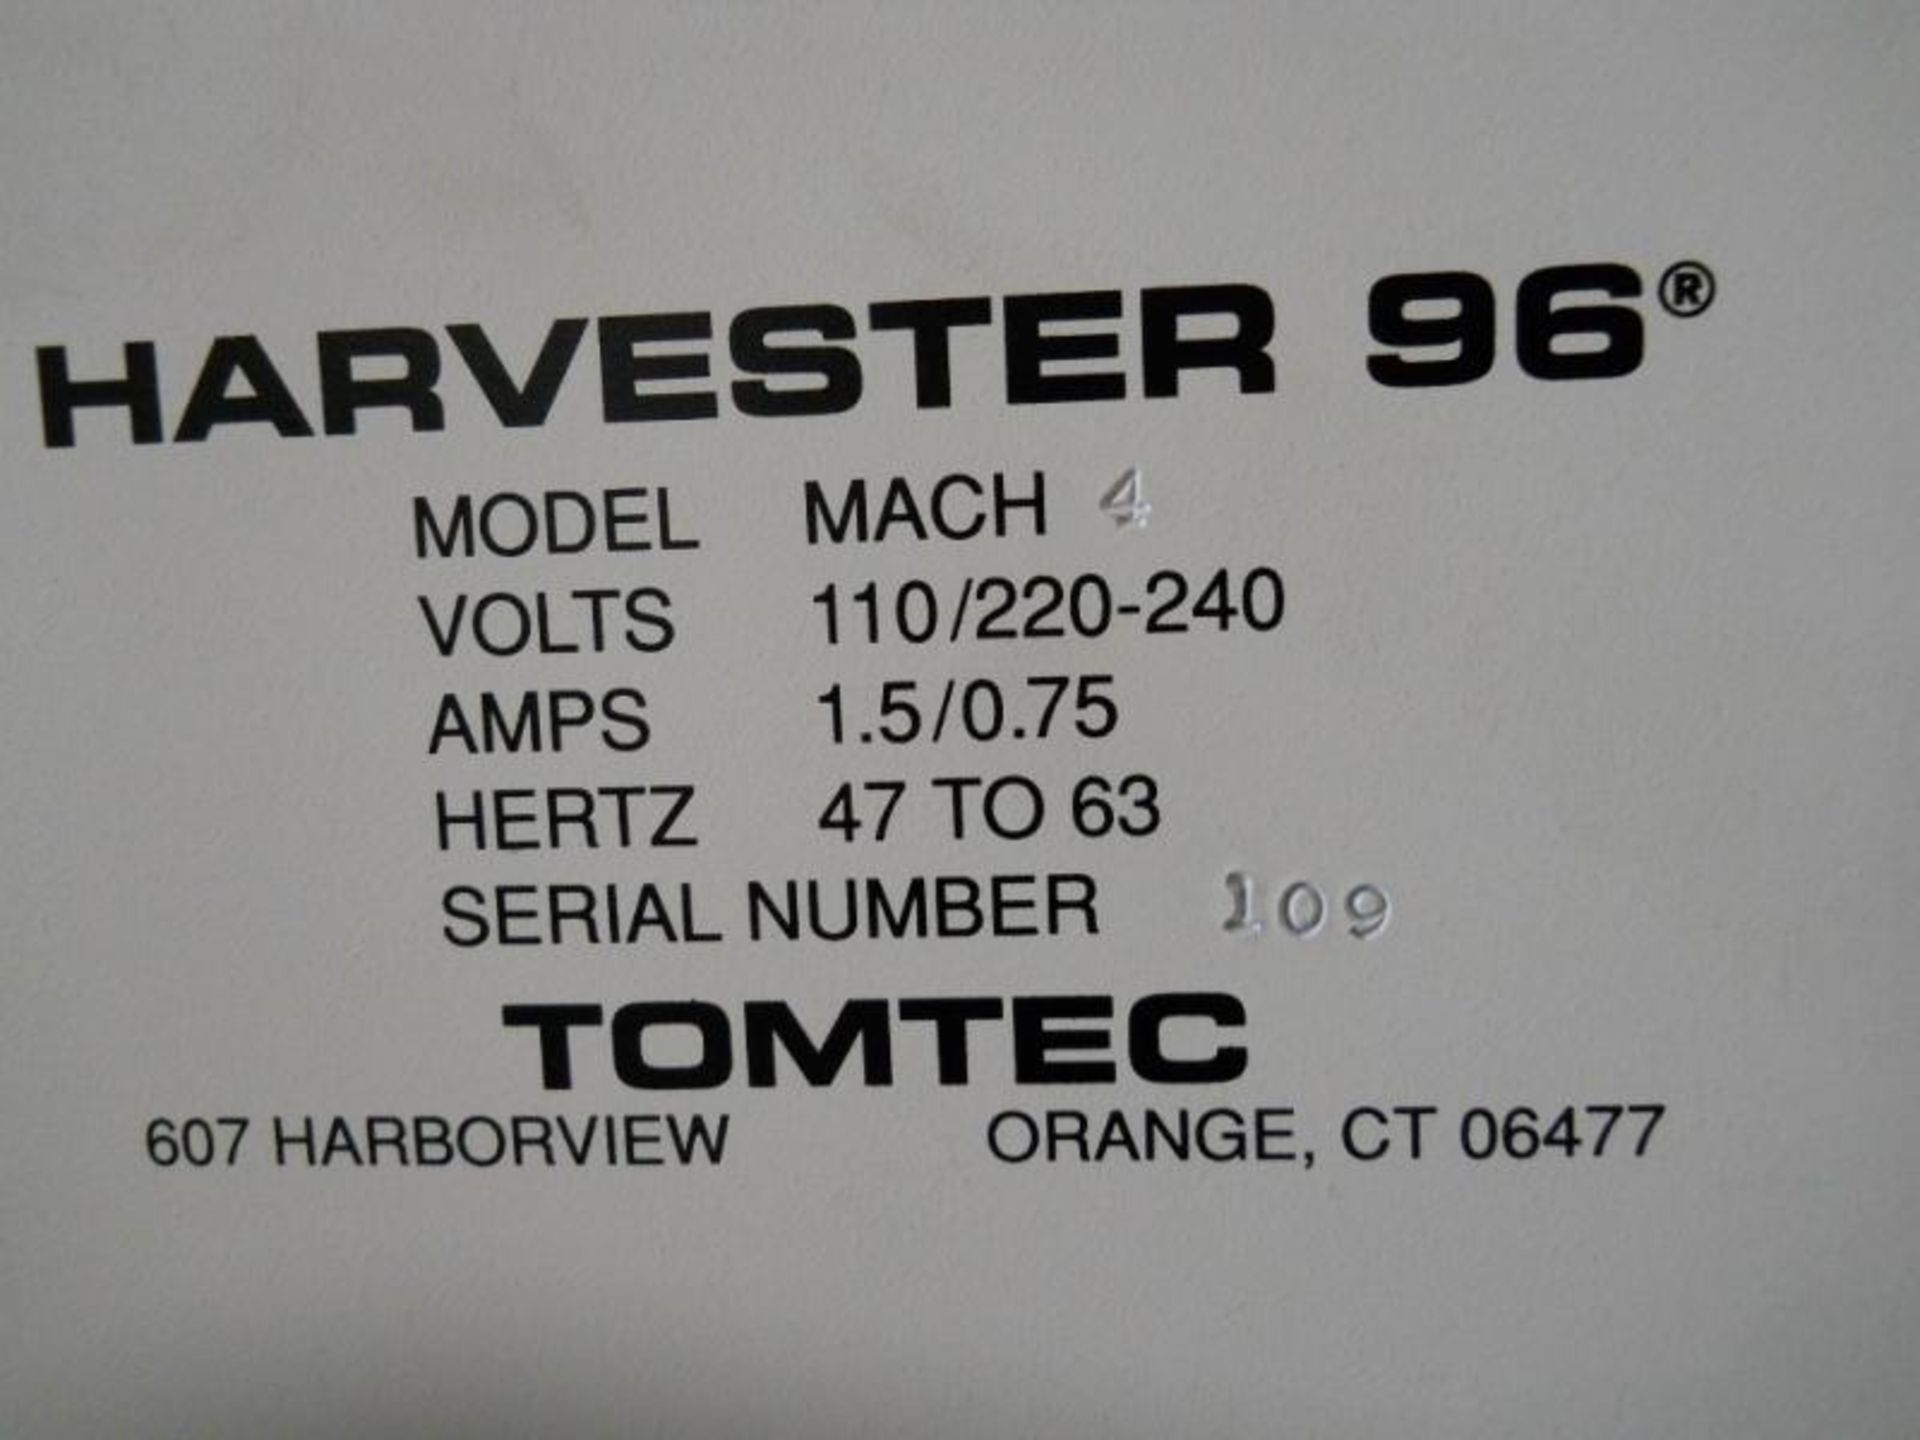 Tomtec Harvester 96 Mach 4 (IV) Automated Cell Harvester, Qty 1, 330999292576 - Image 12 of 14